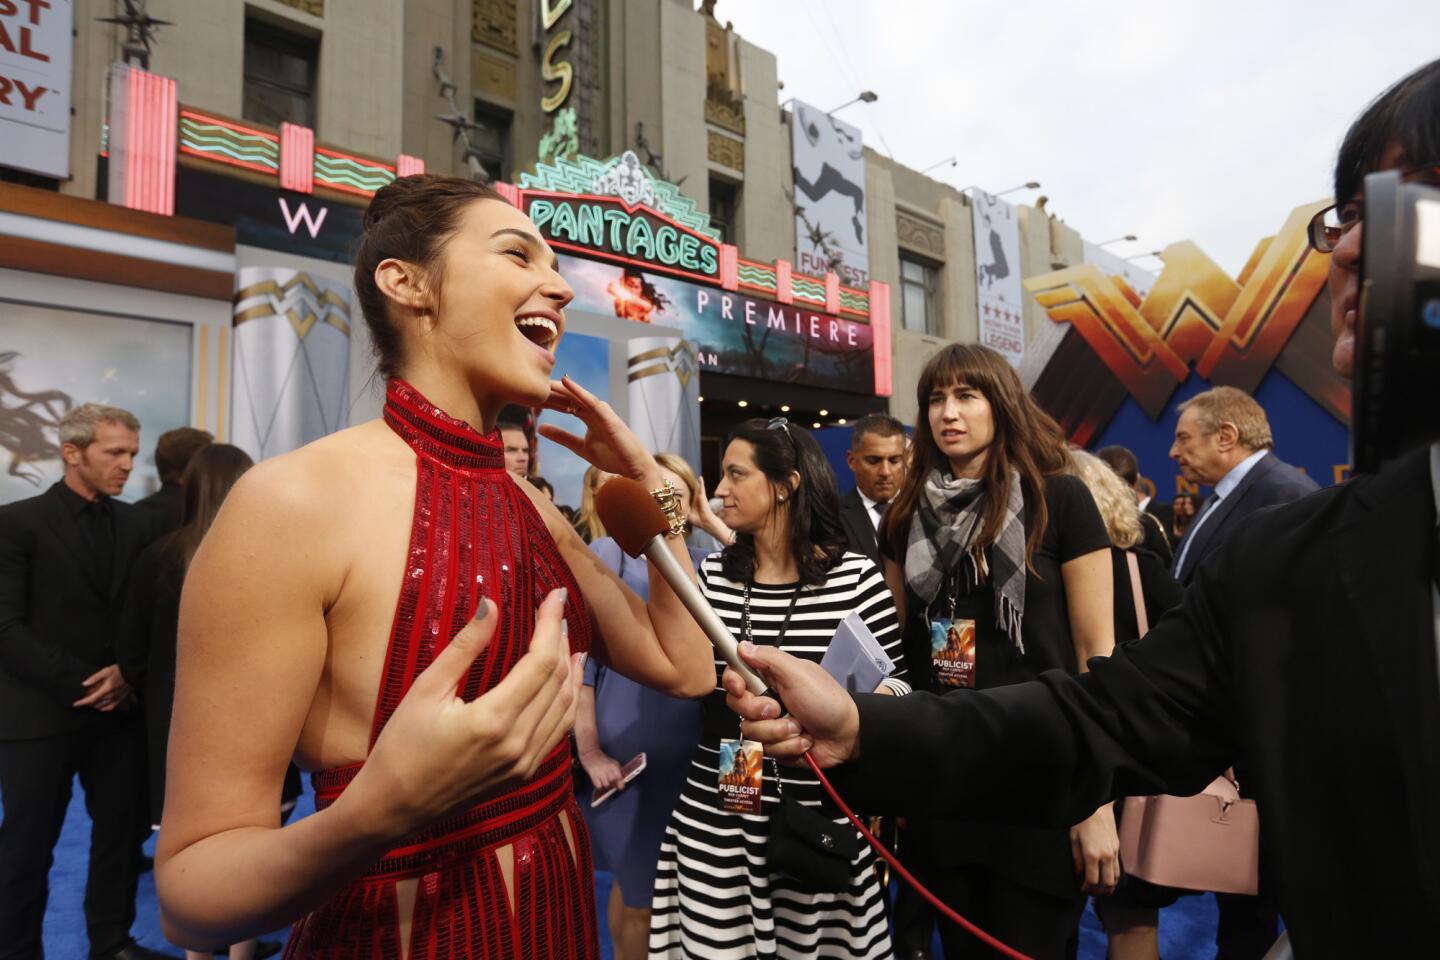 Actress Gal Gadot, who plays Wonder Woman, at the premiere for the movie at the Pantages Theatre in Hollywood on May 25, 2017.